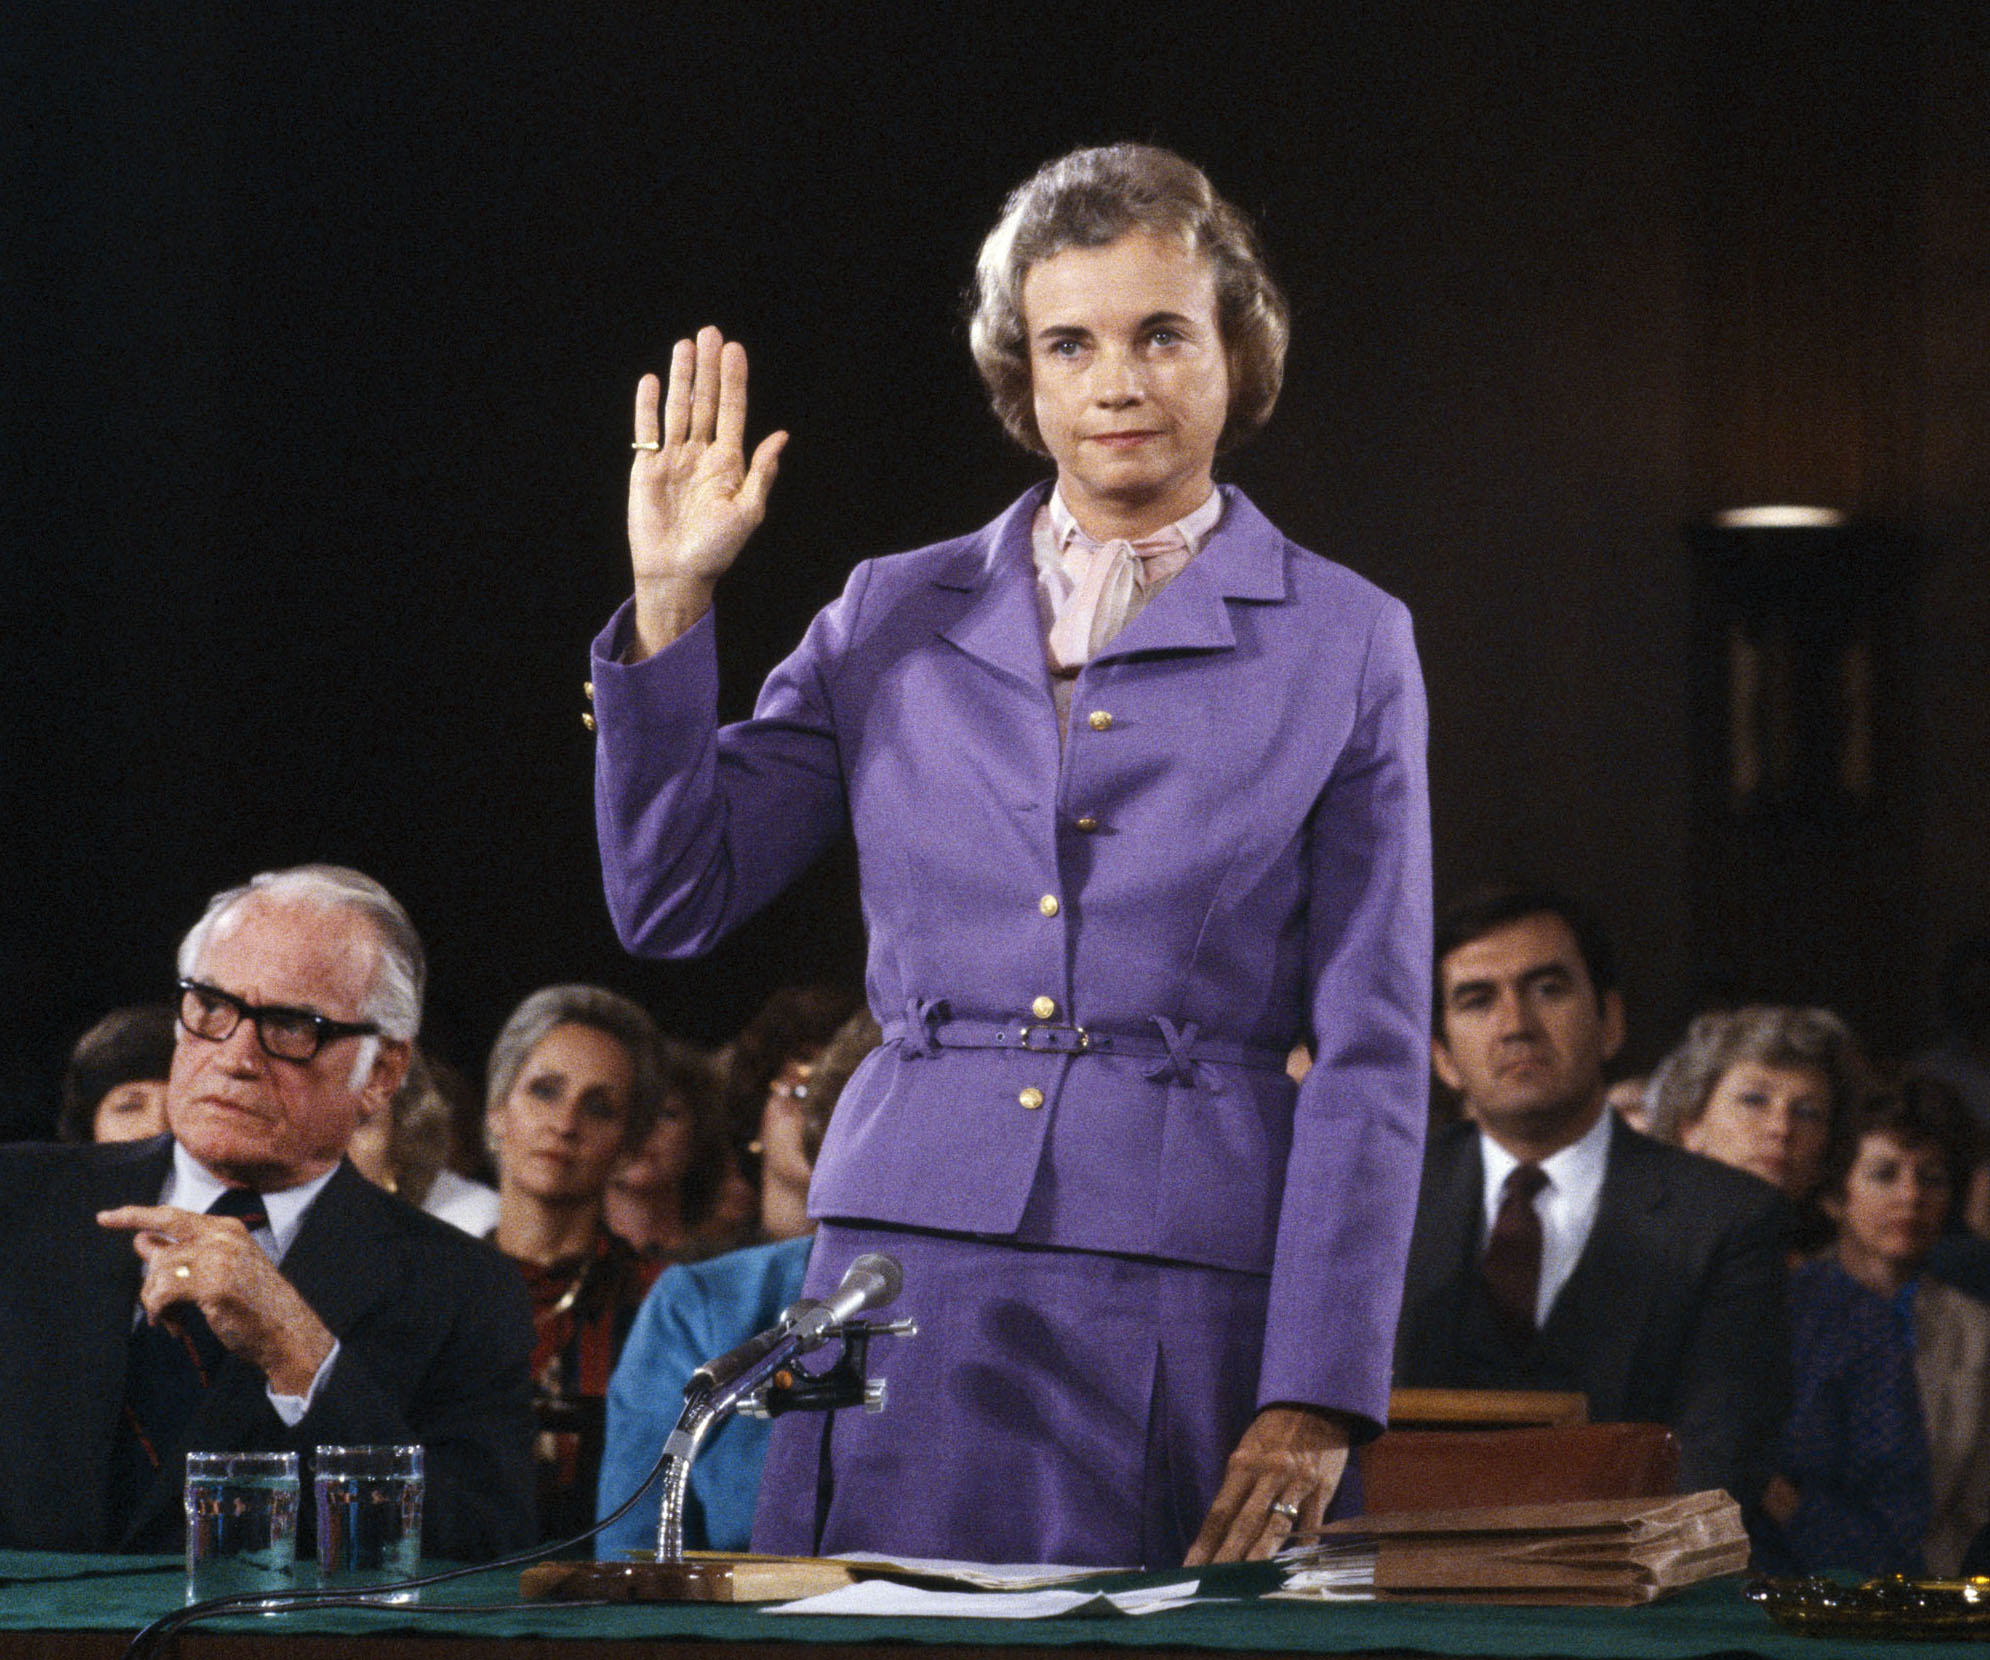 Judge O’Connor sworn in before her testimony to the Senate Judiciary Committee. Sen. Barry Goldwater at left.